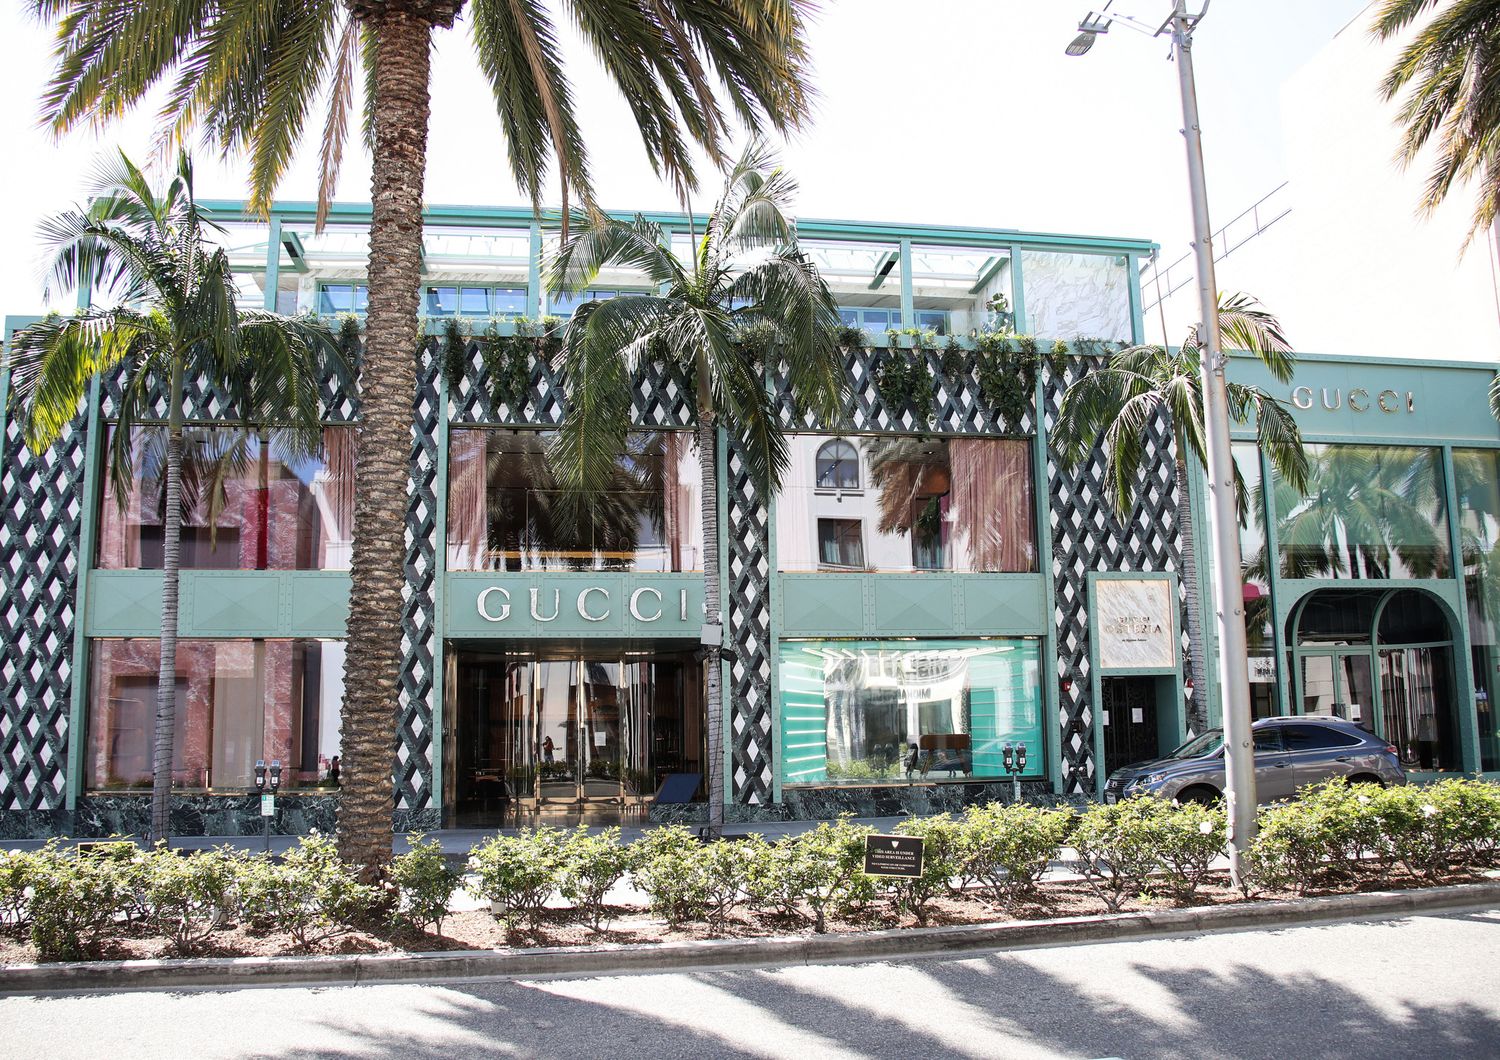 Gucci, Rodeo Drive, Los Angeles